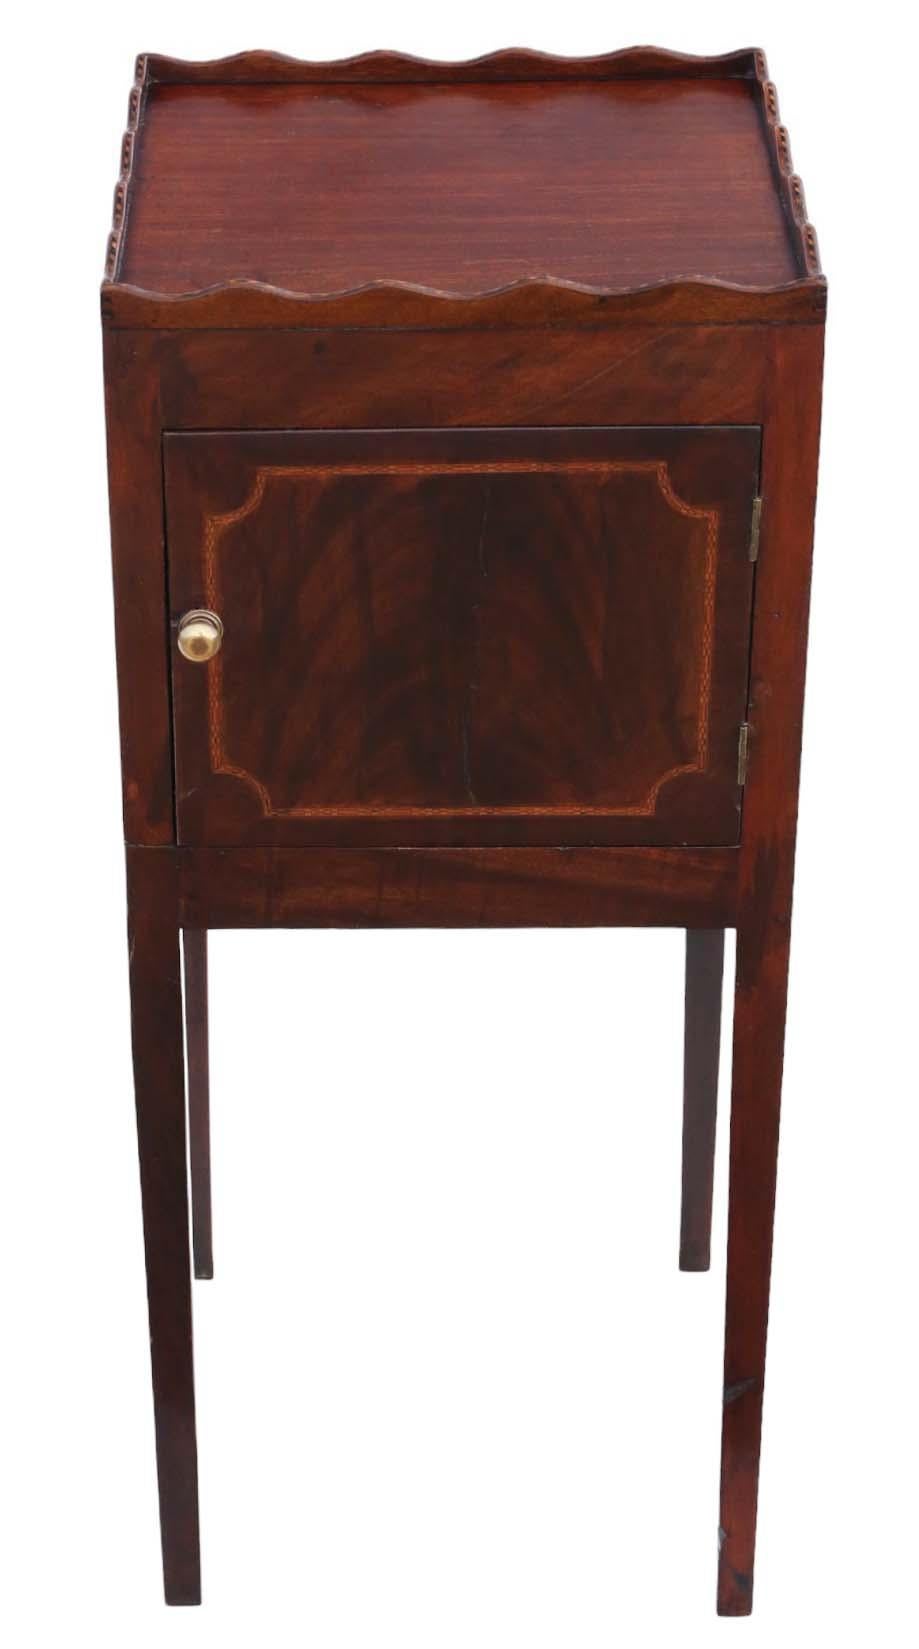 Authentic 19th Century mahogany nightstand featuring a tray top, adorned with intricate inlay, doubling as a washstand or bedside table from the Georgian period.

This remarkable piece boasts sturdy construction with no loose joints or woodworm